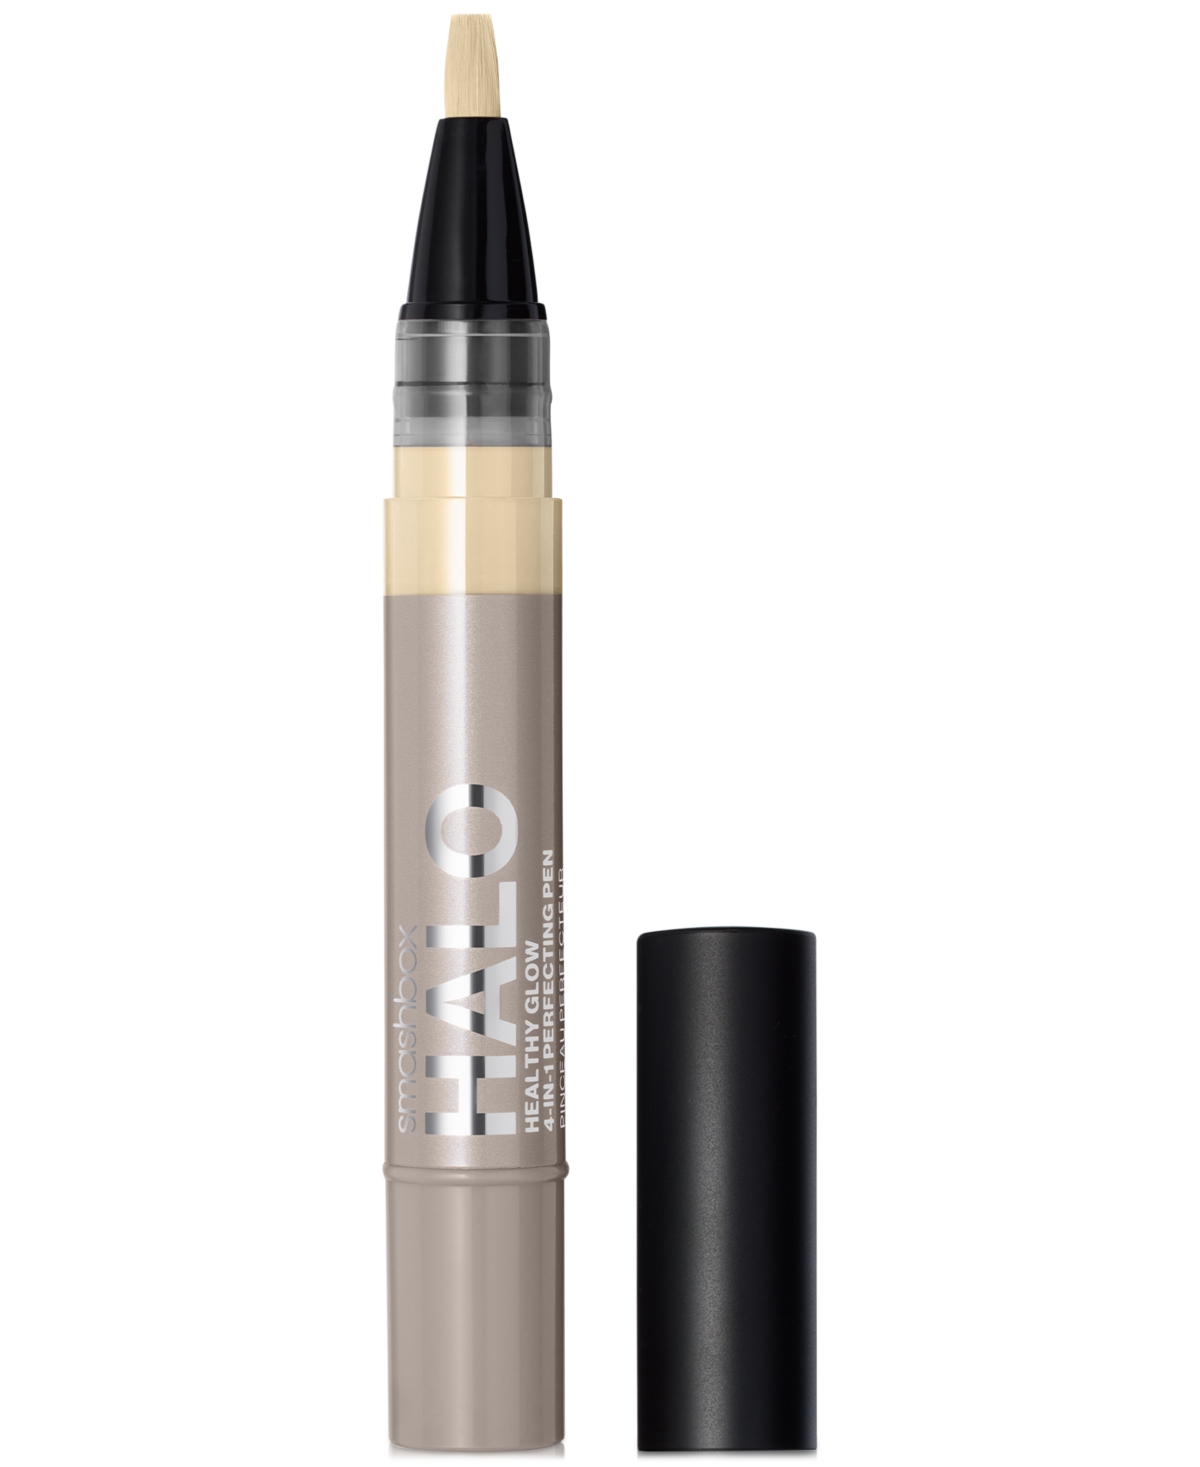 Smashbox Halo Healthy Glow 4-in-1 Perfecting Pen In F-w (level-one Fair With A Warm Underton